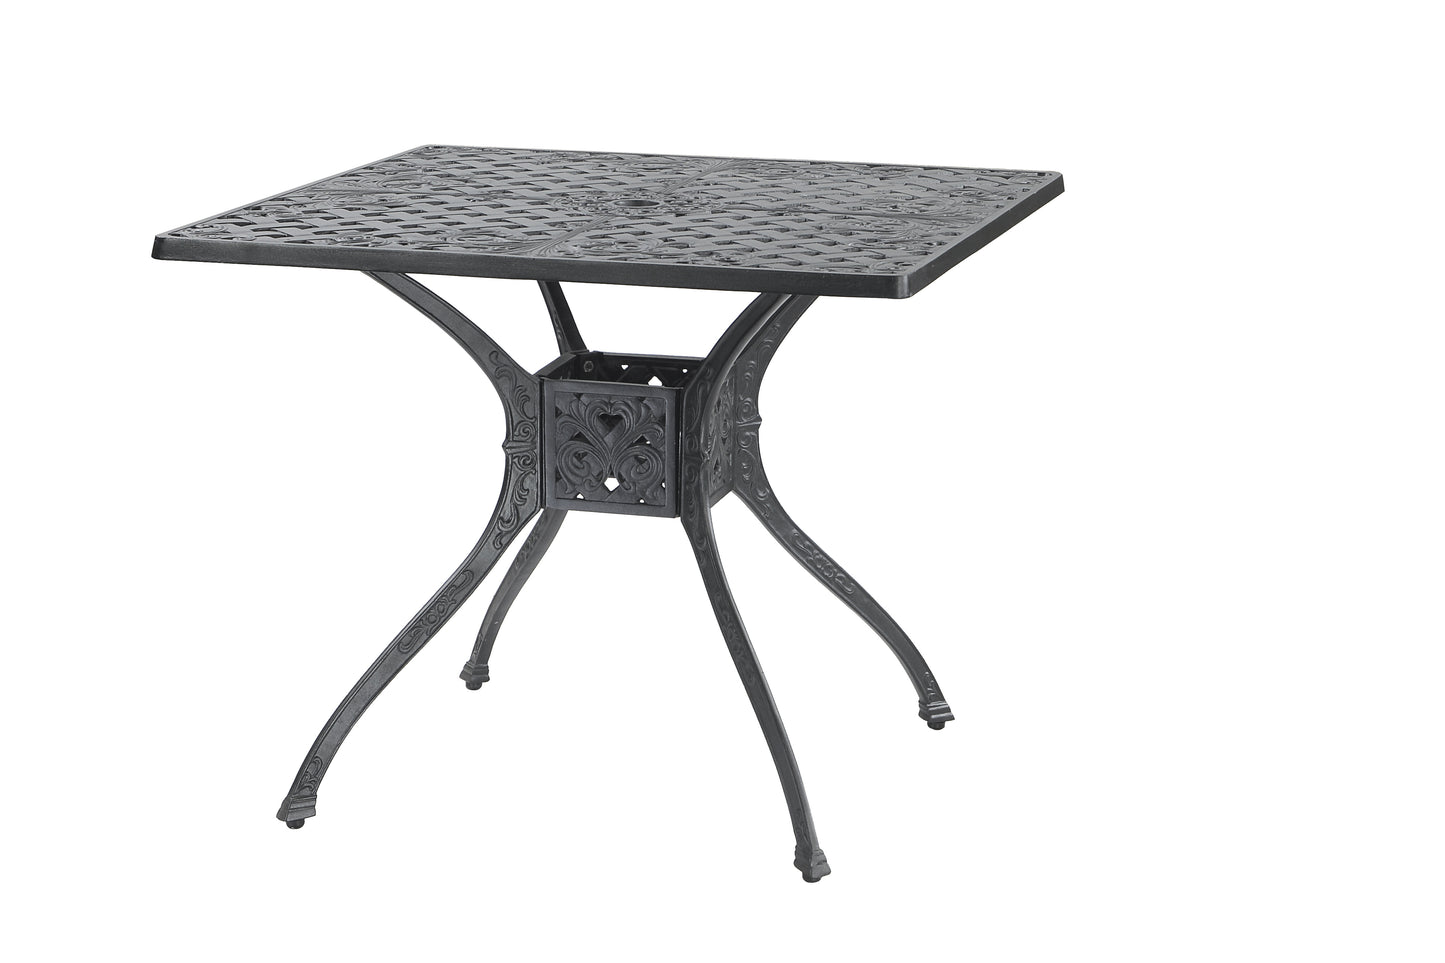 Click to View all Verona Tables & Accessories